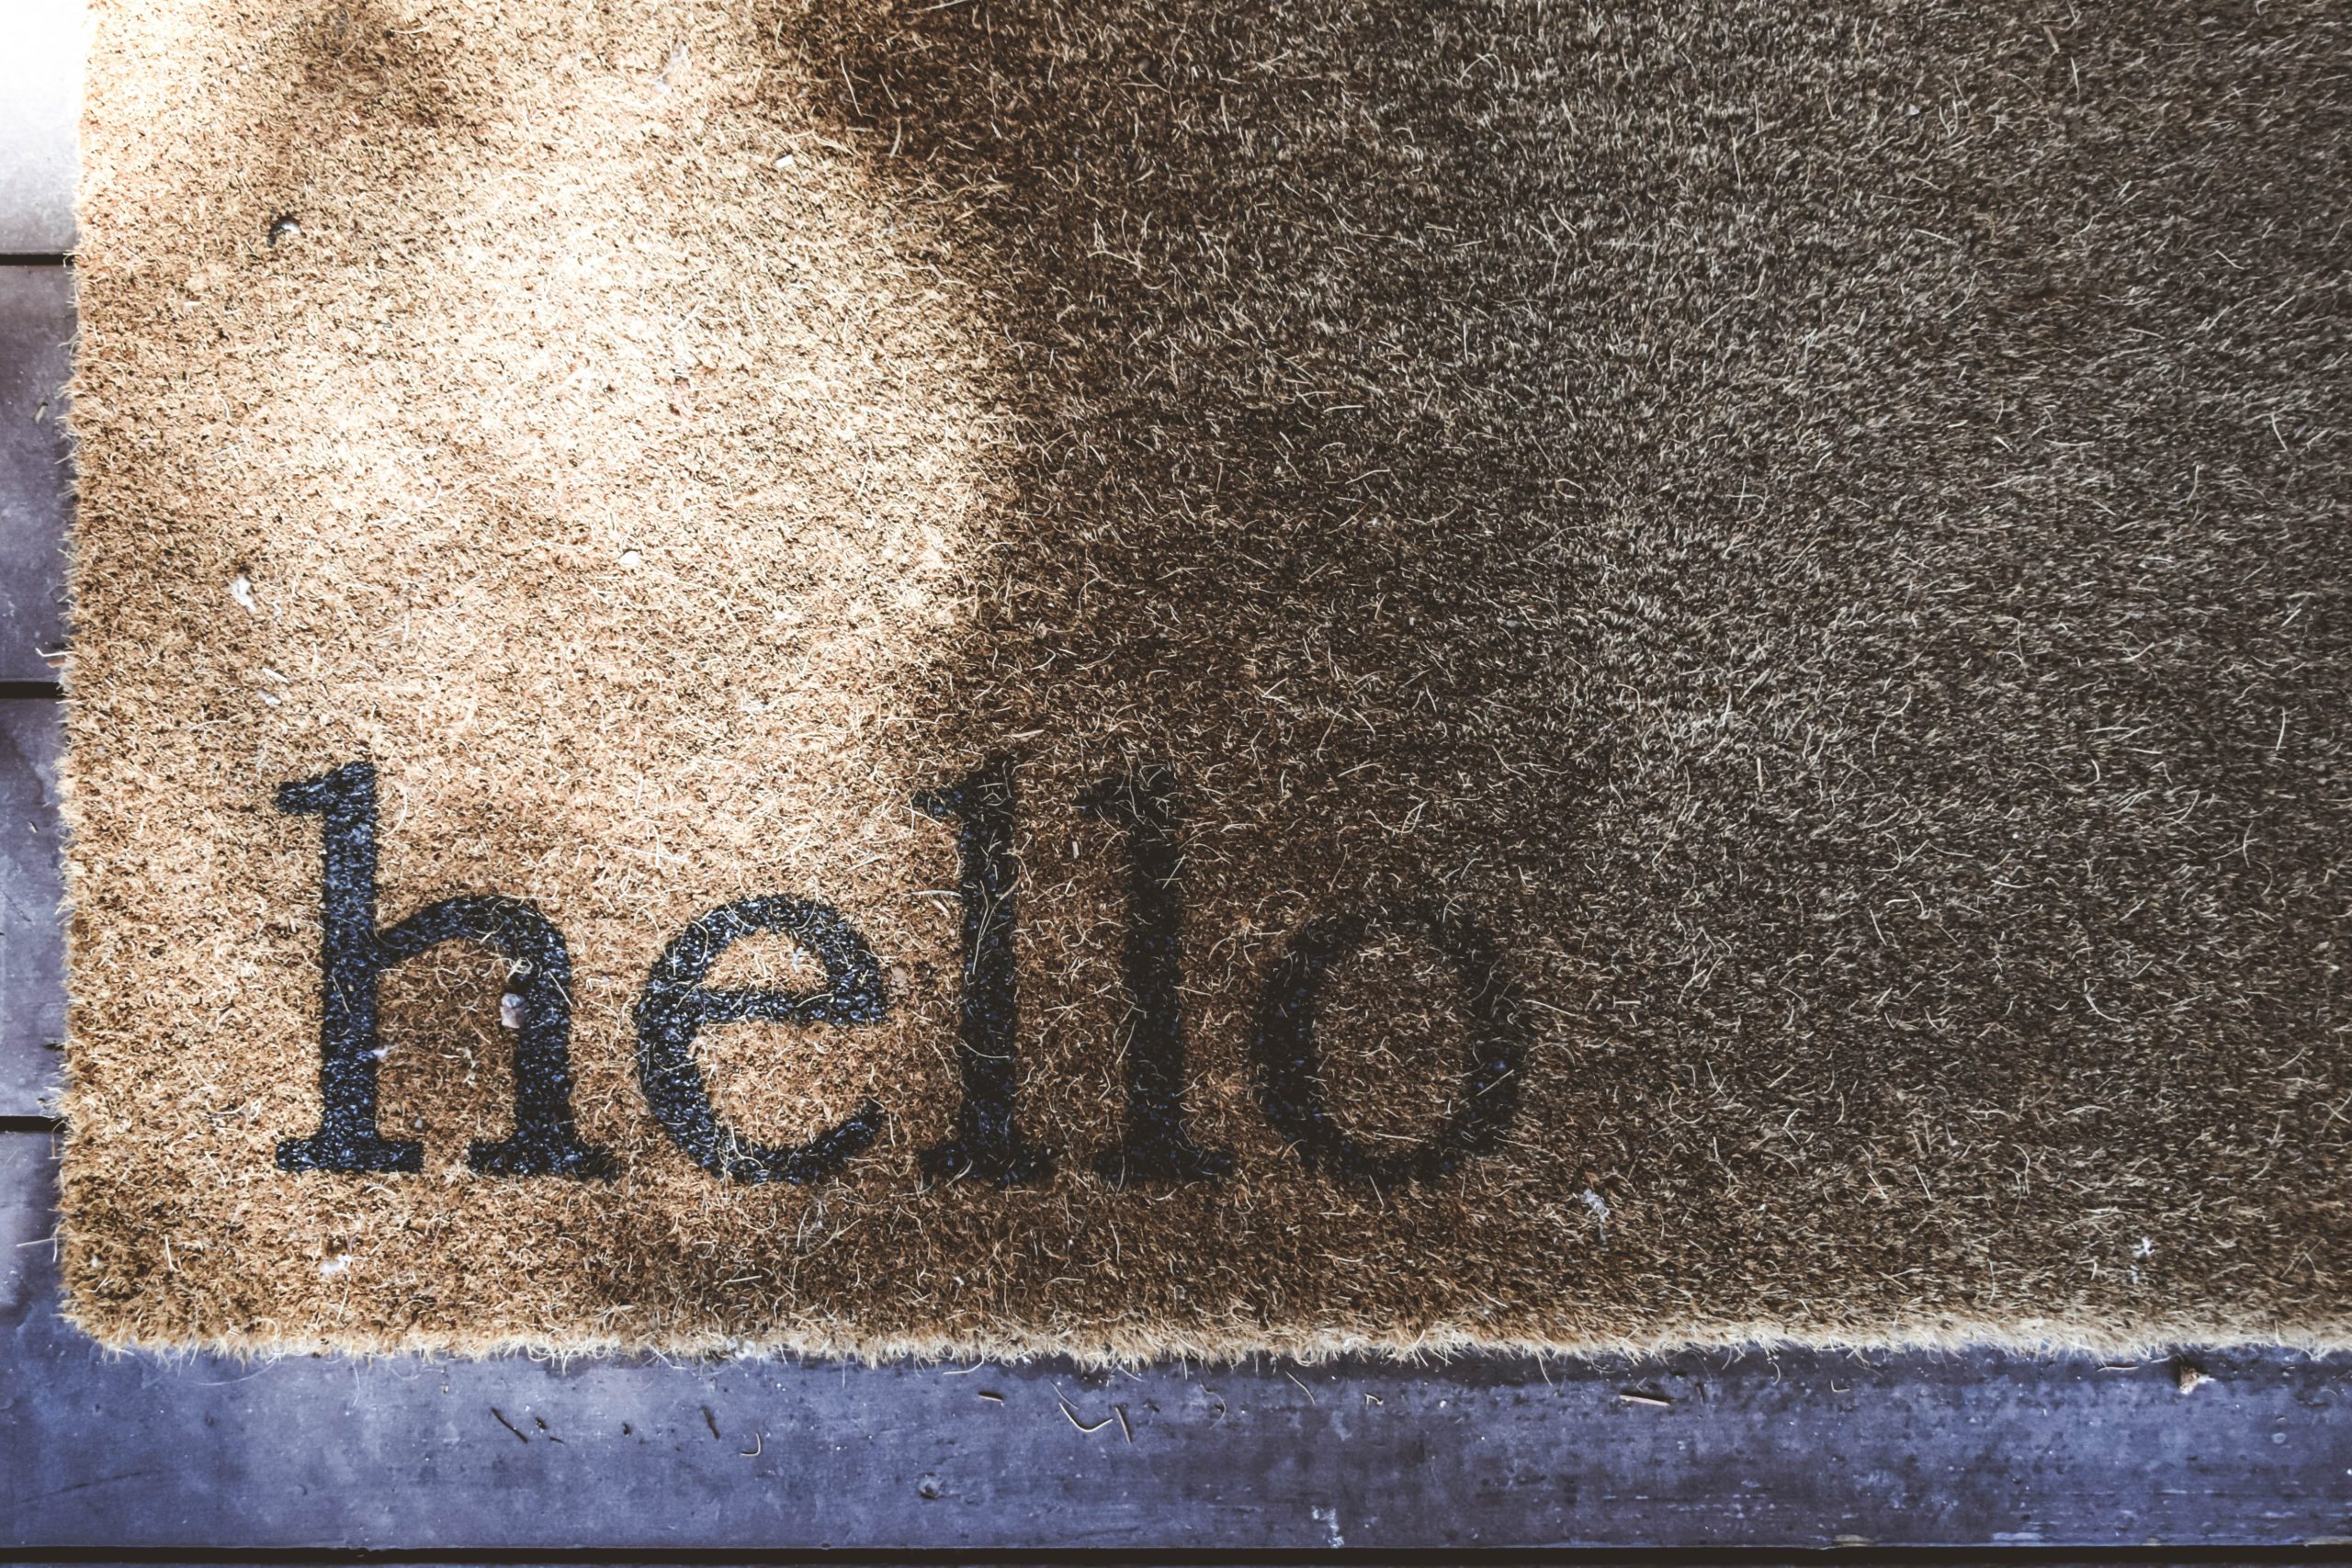 Photograph of a welcome mat with "hello" printed on the bottom left corner